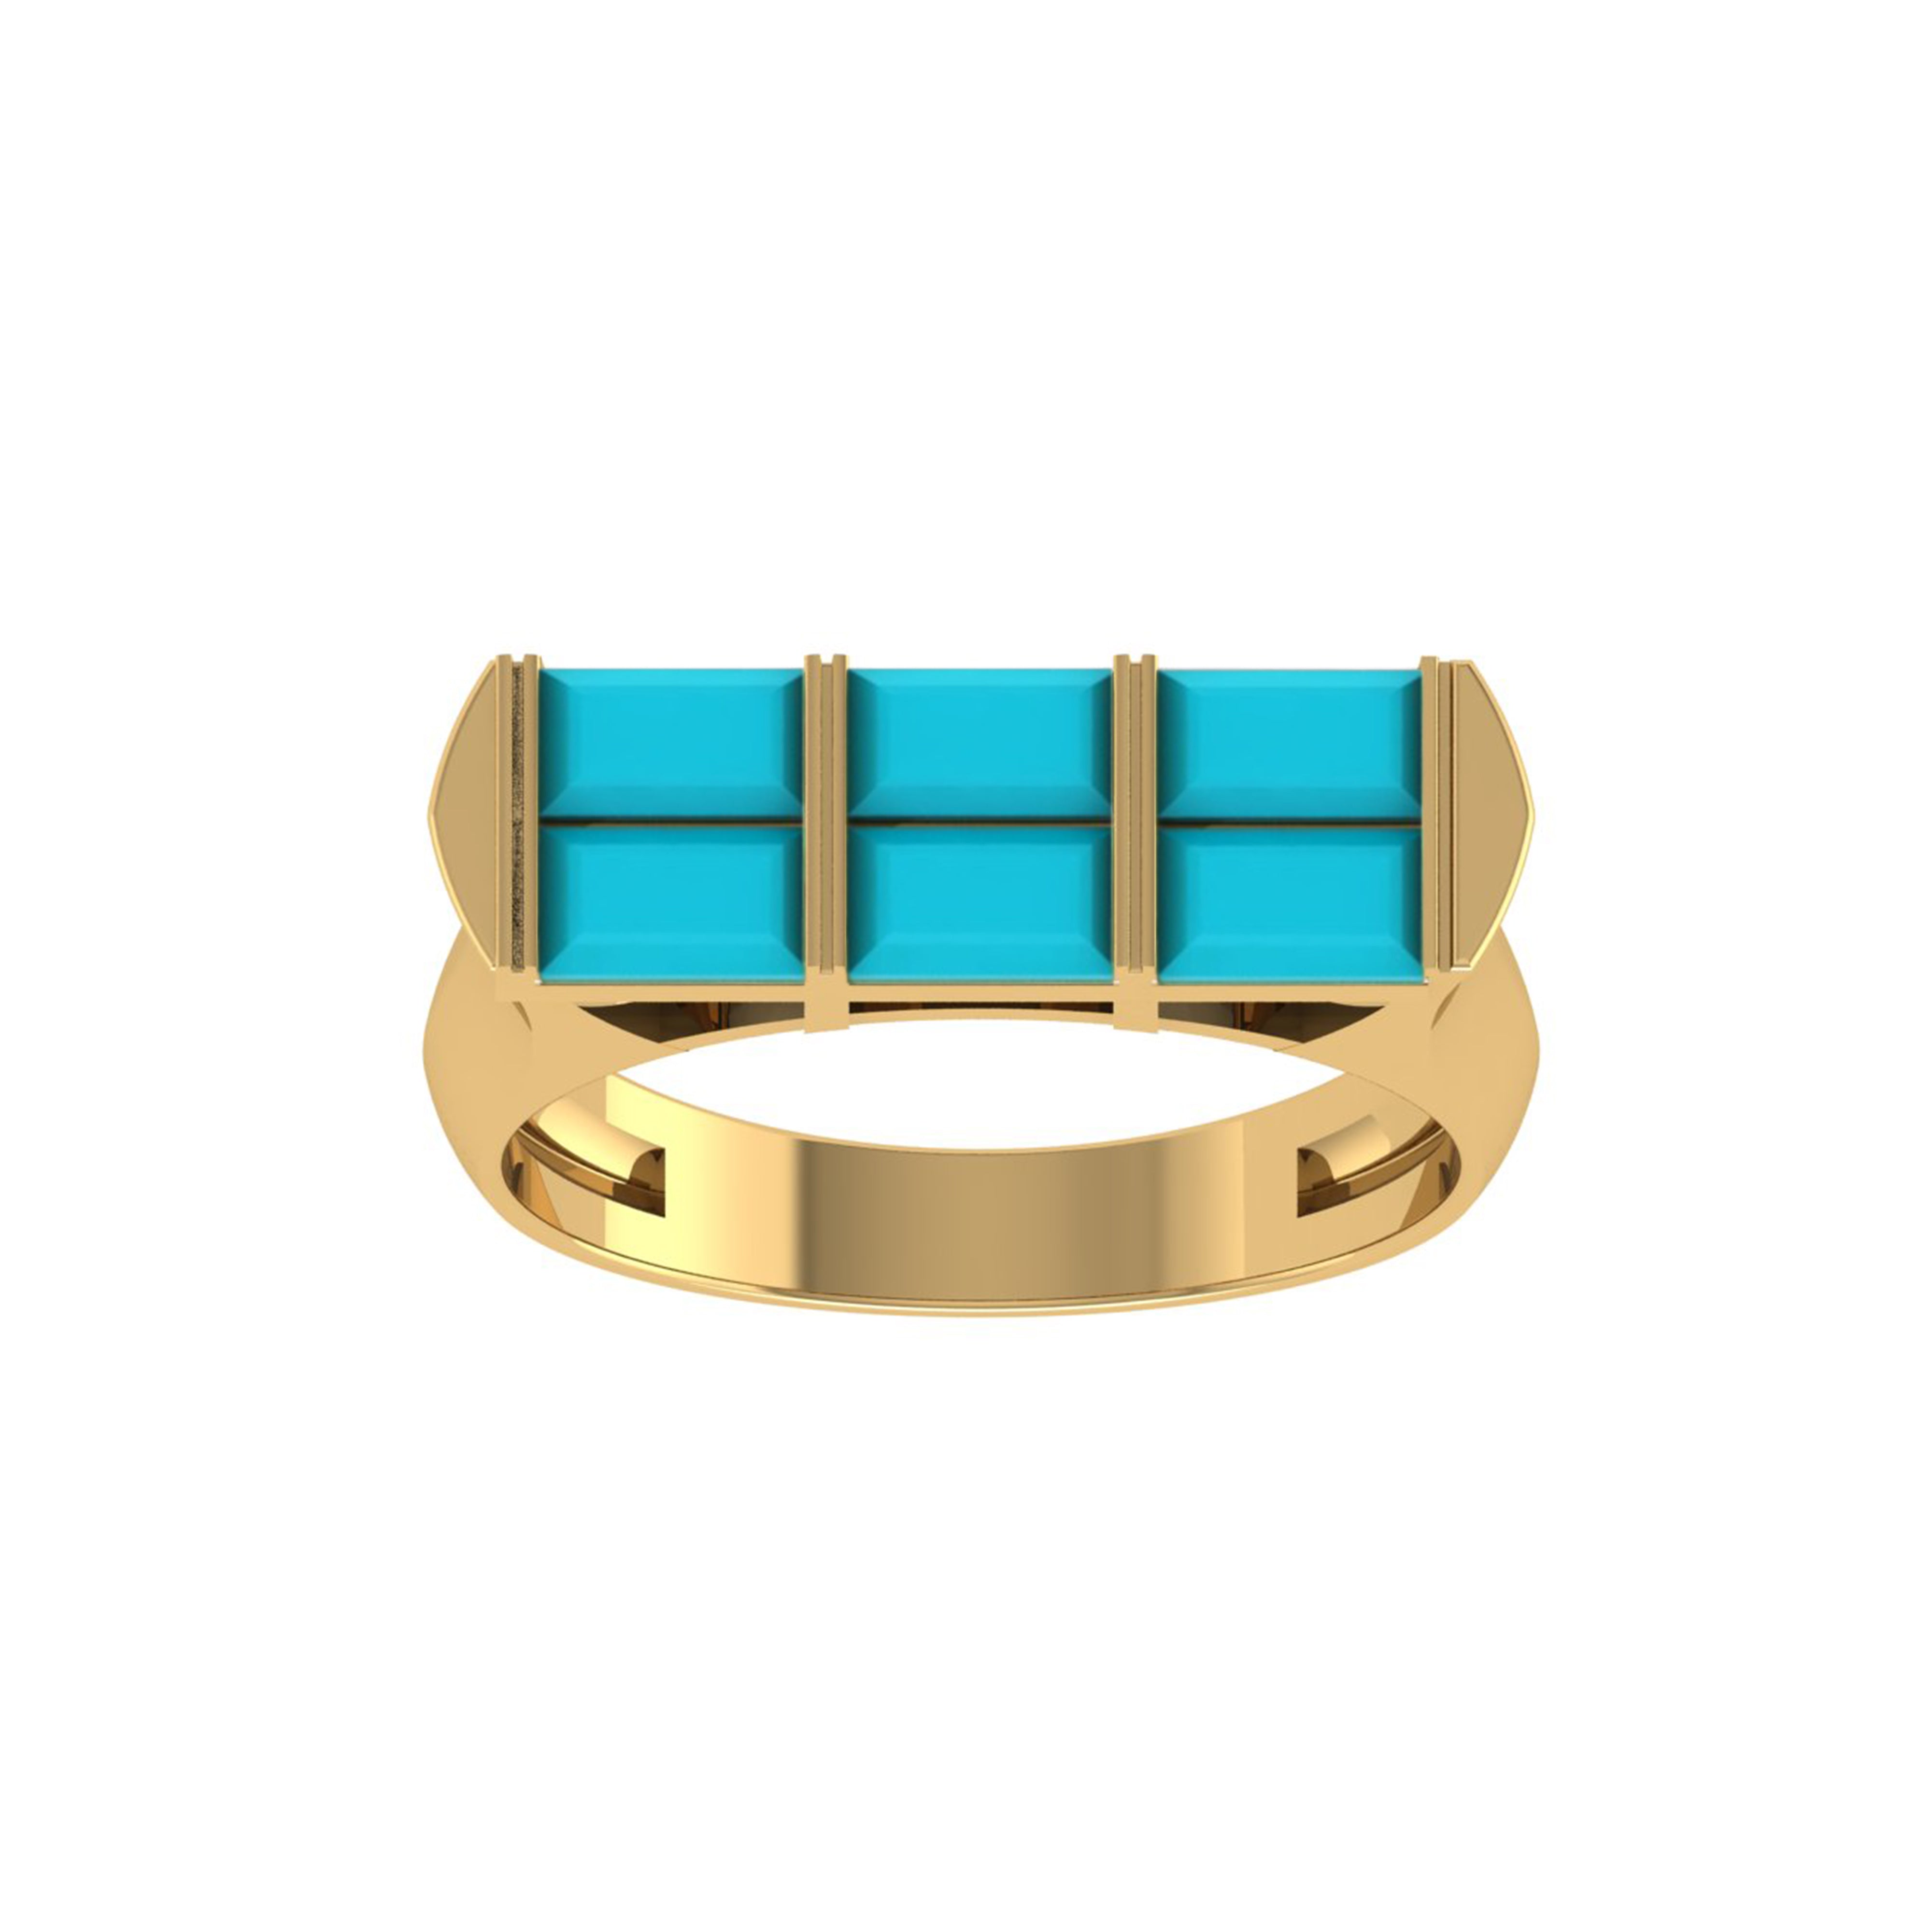 Turquoise Stacker Ring - The Jewelz 